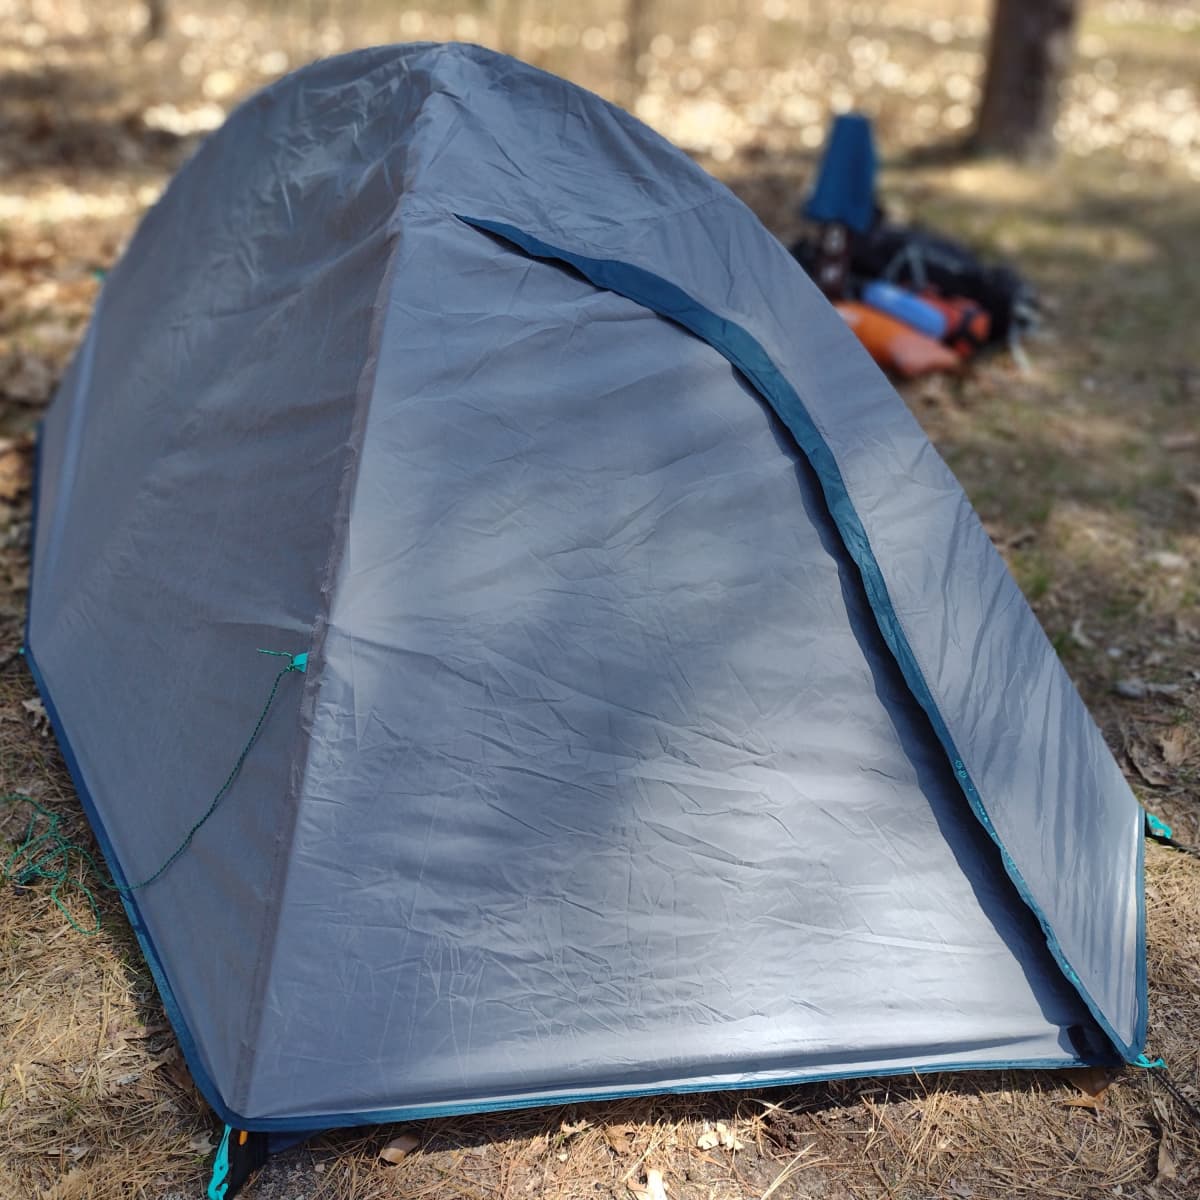 Vooruitgaan Slapen Sanctie Decathlon Quechua MH100: 2-Person Waterproof Camping Tent Field Test,  Review, and Opinion - SkyAboveUs